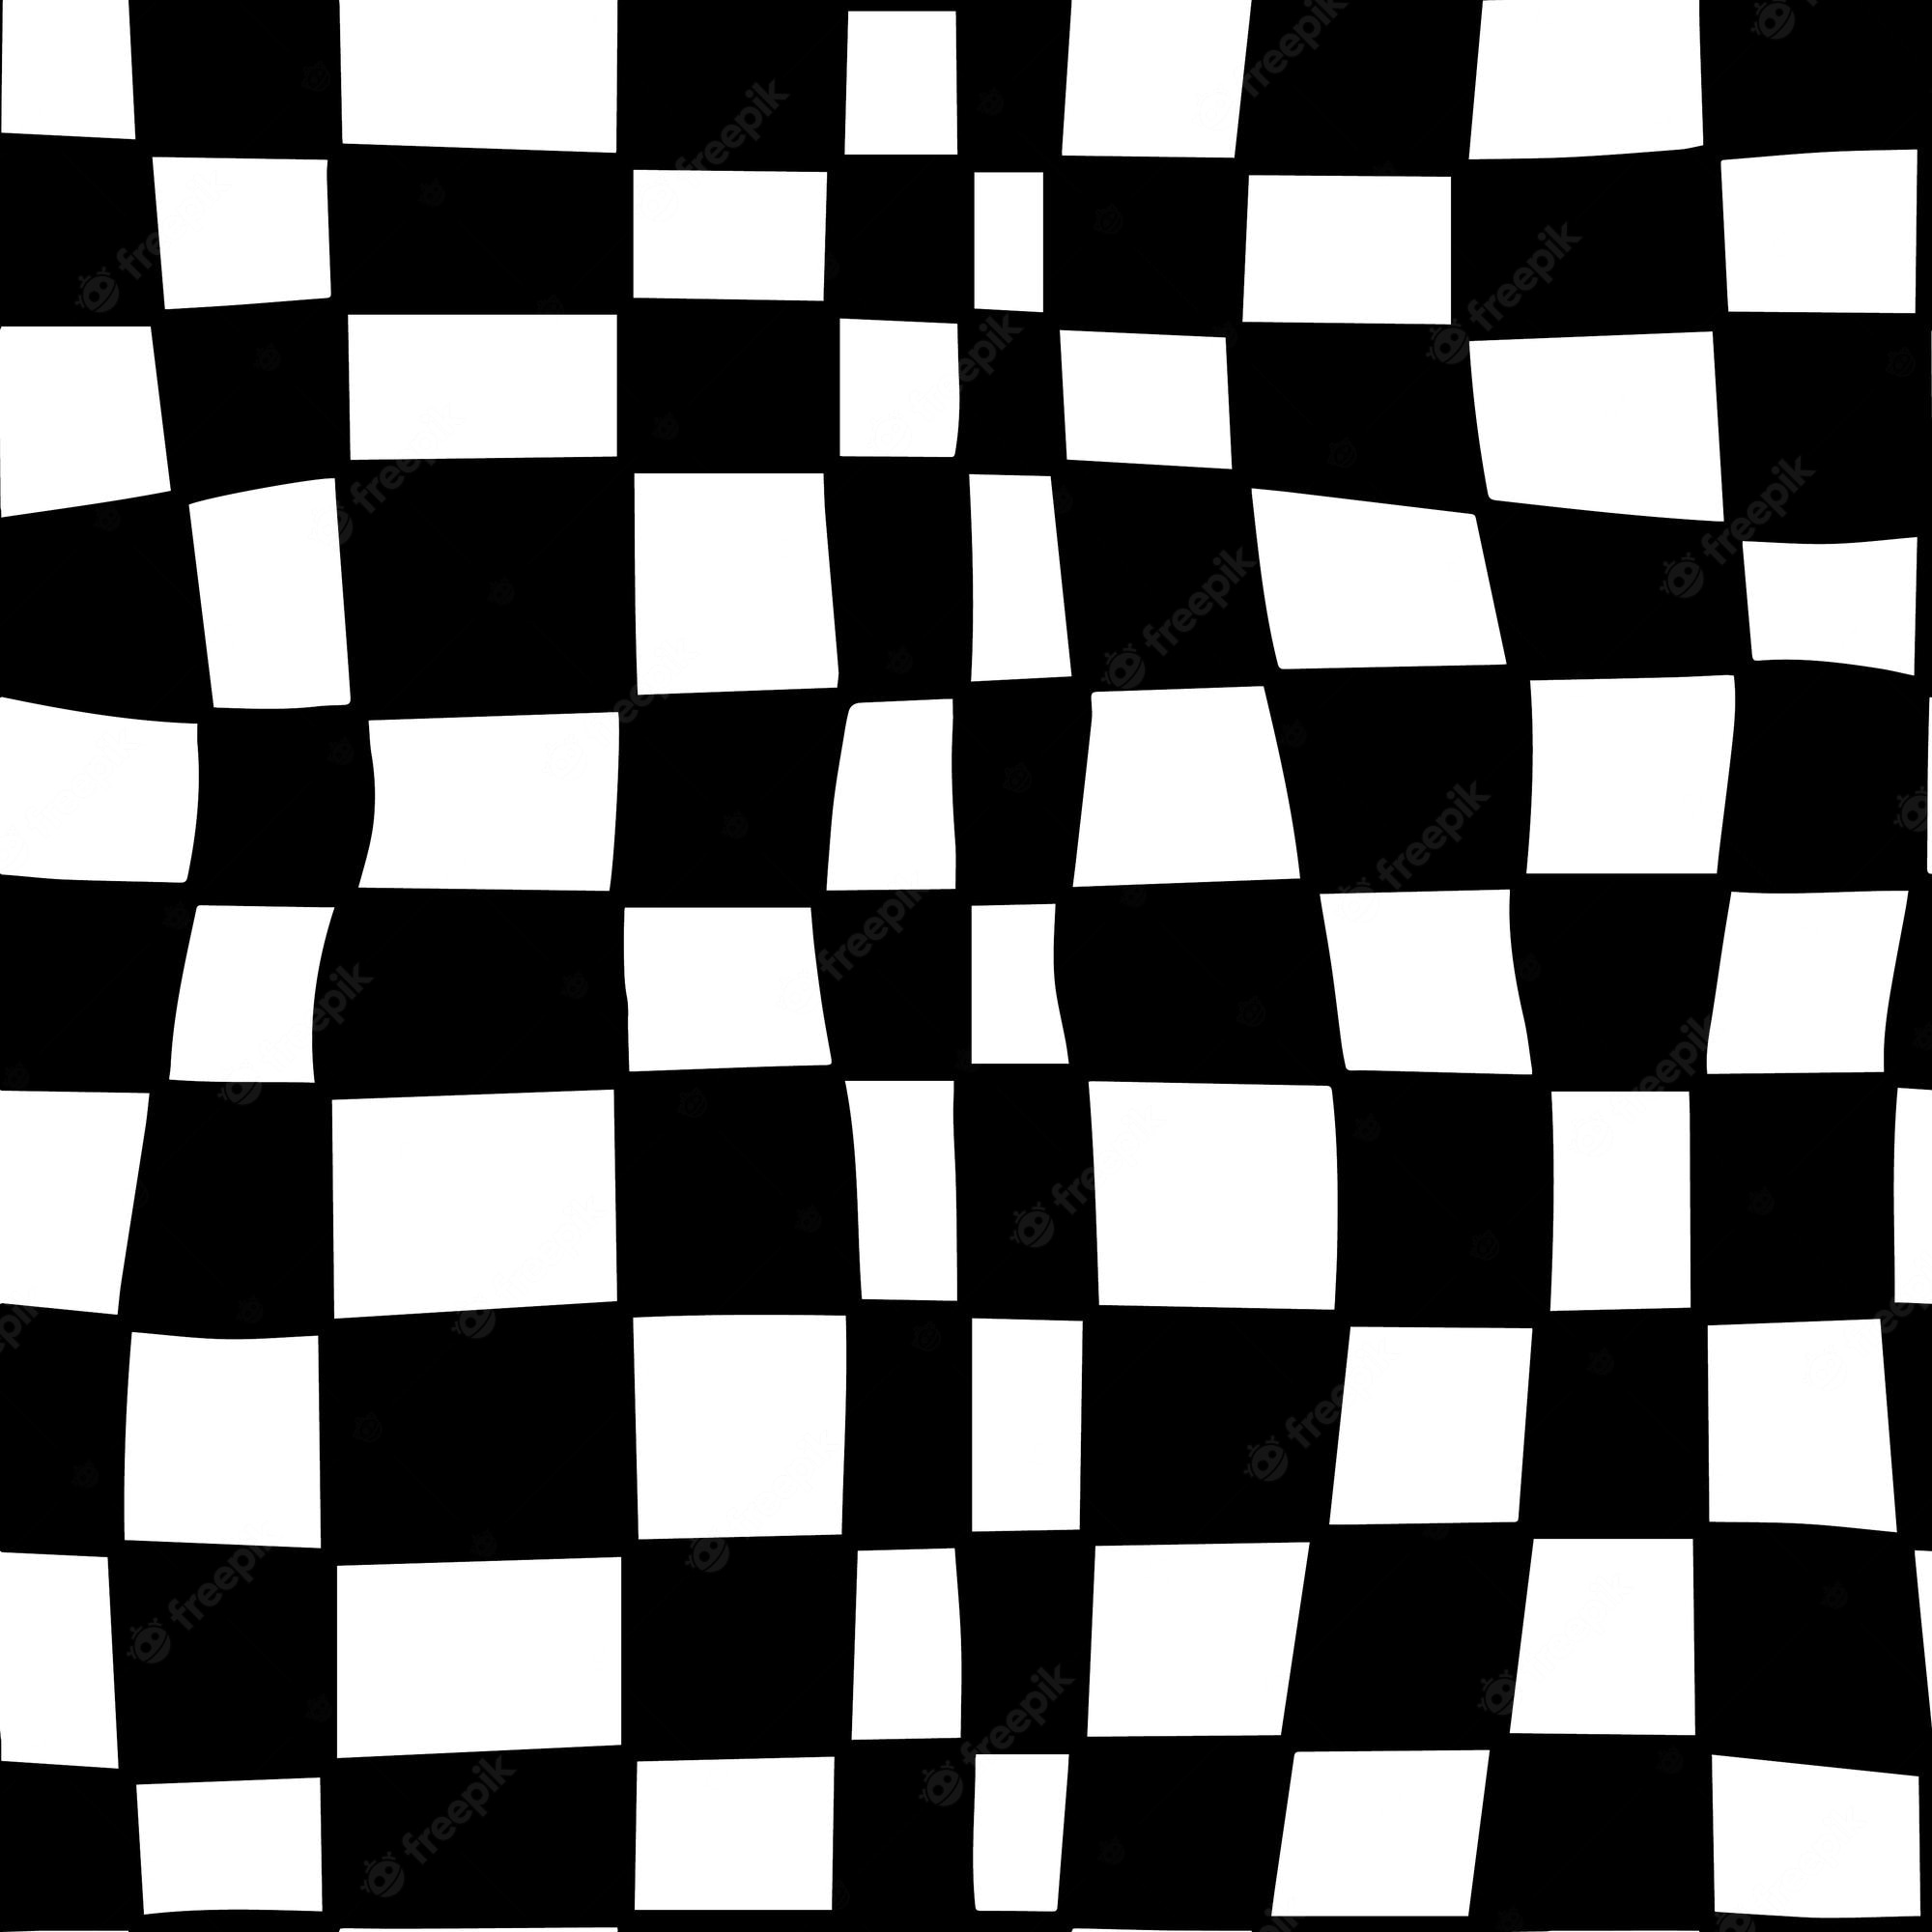 Premium Vector. Black and white groovy wavy melted psychedelic hand drawn checkerboard y2k 90s seamless pattern